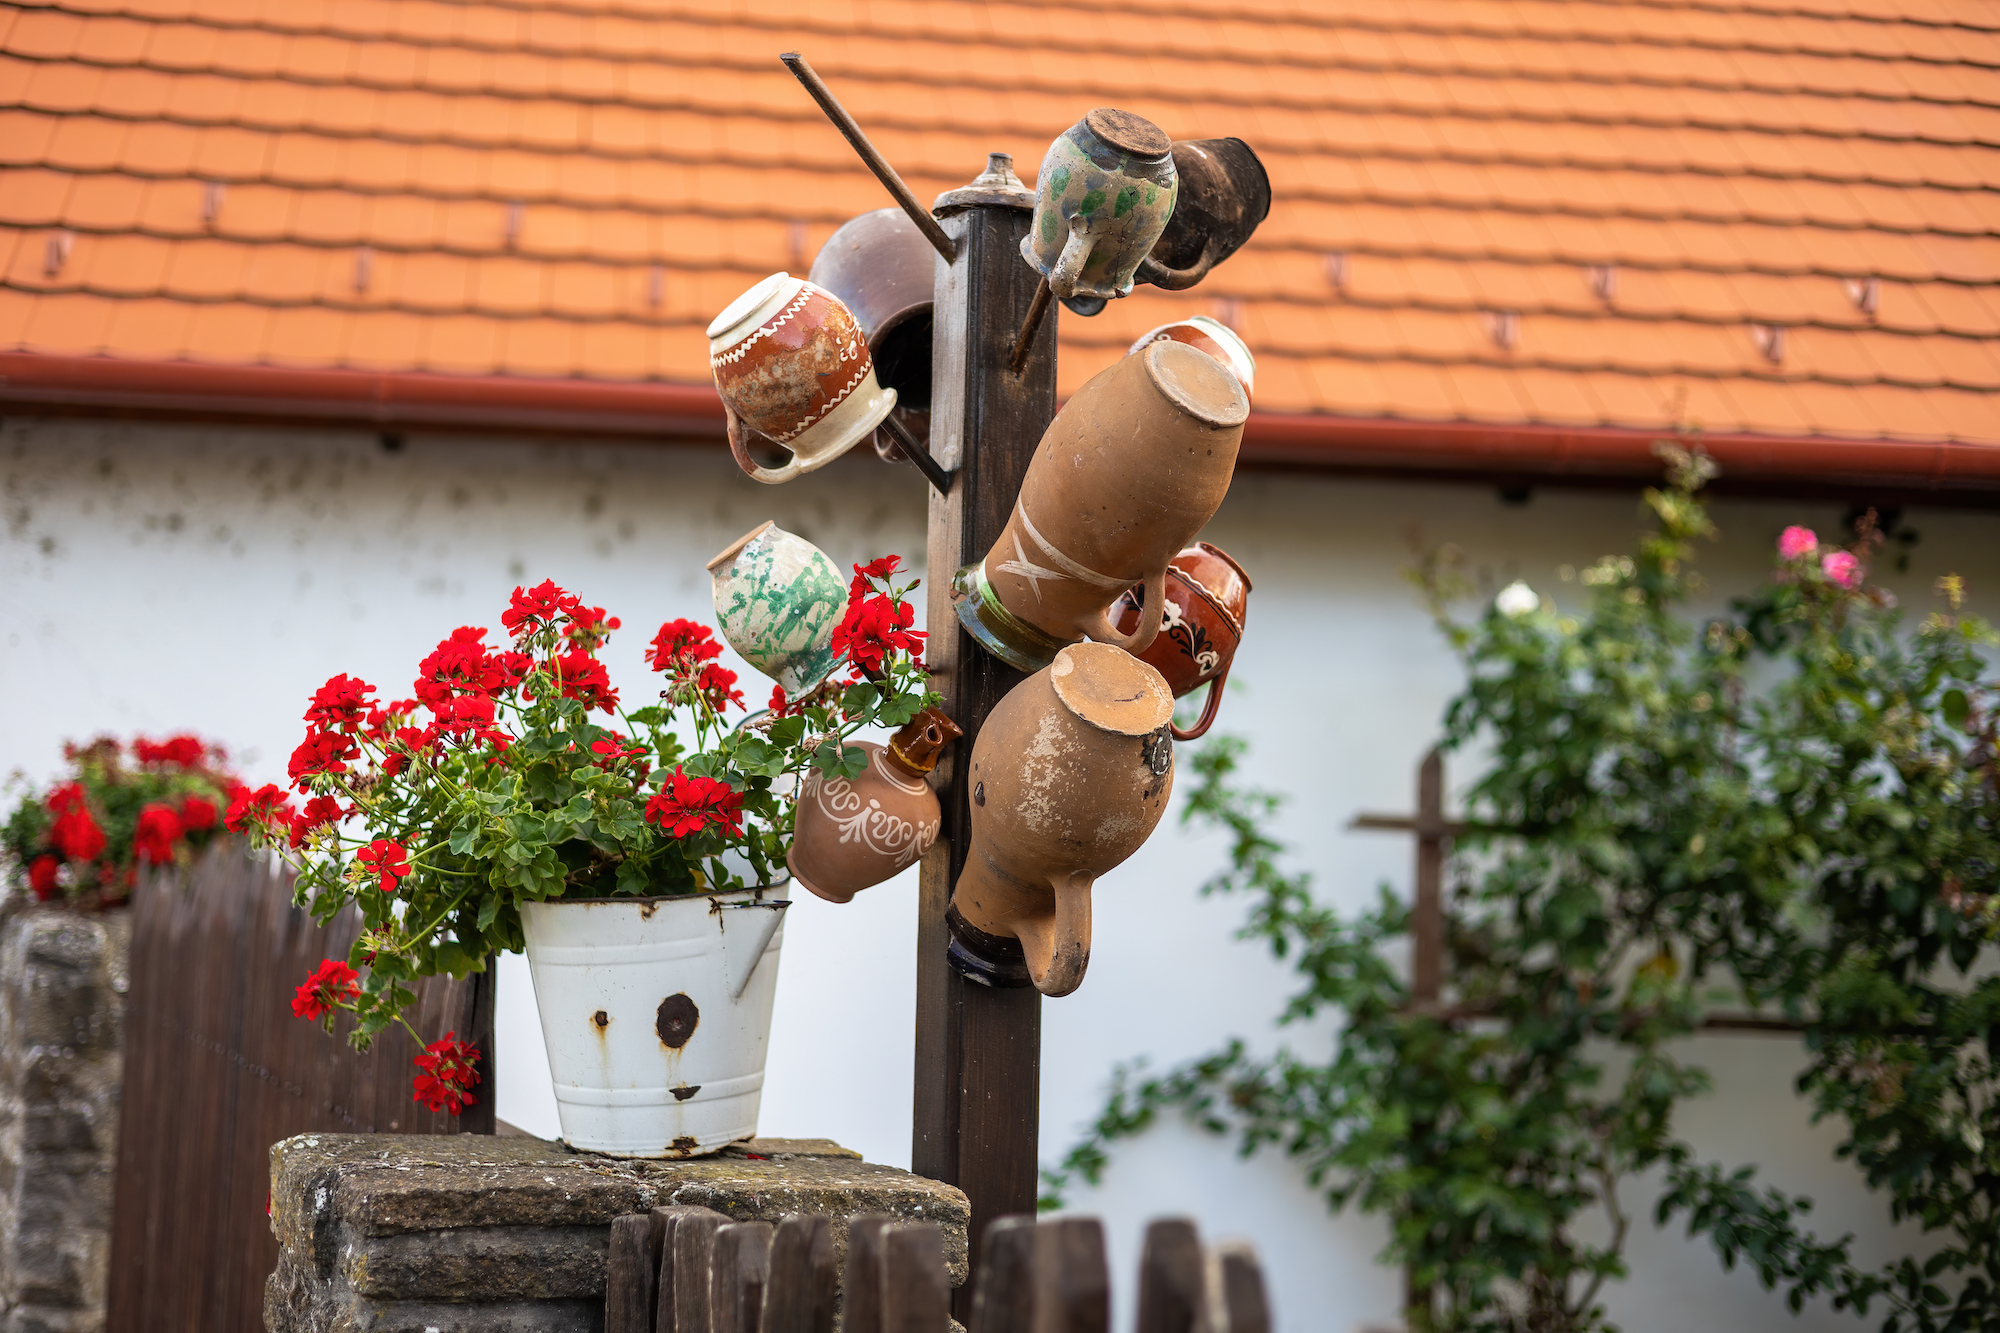 Several ceramic cups stored hanging on a fence in village in Hungary. Concept of a traditional art and hand made craft in a historical part of a city. Pottery made of mud on a display.